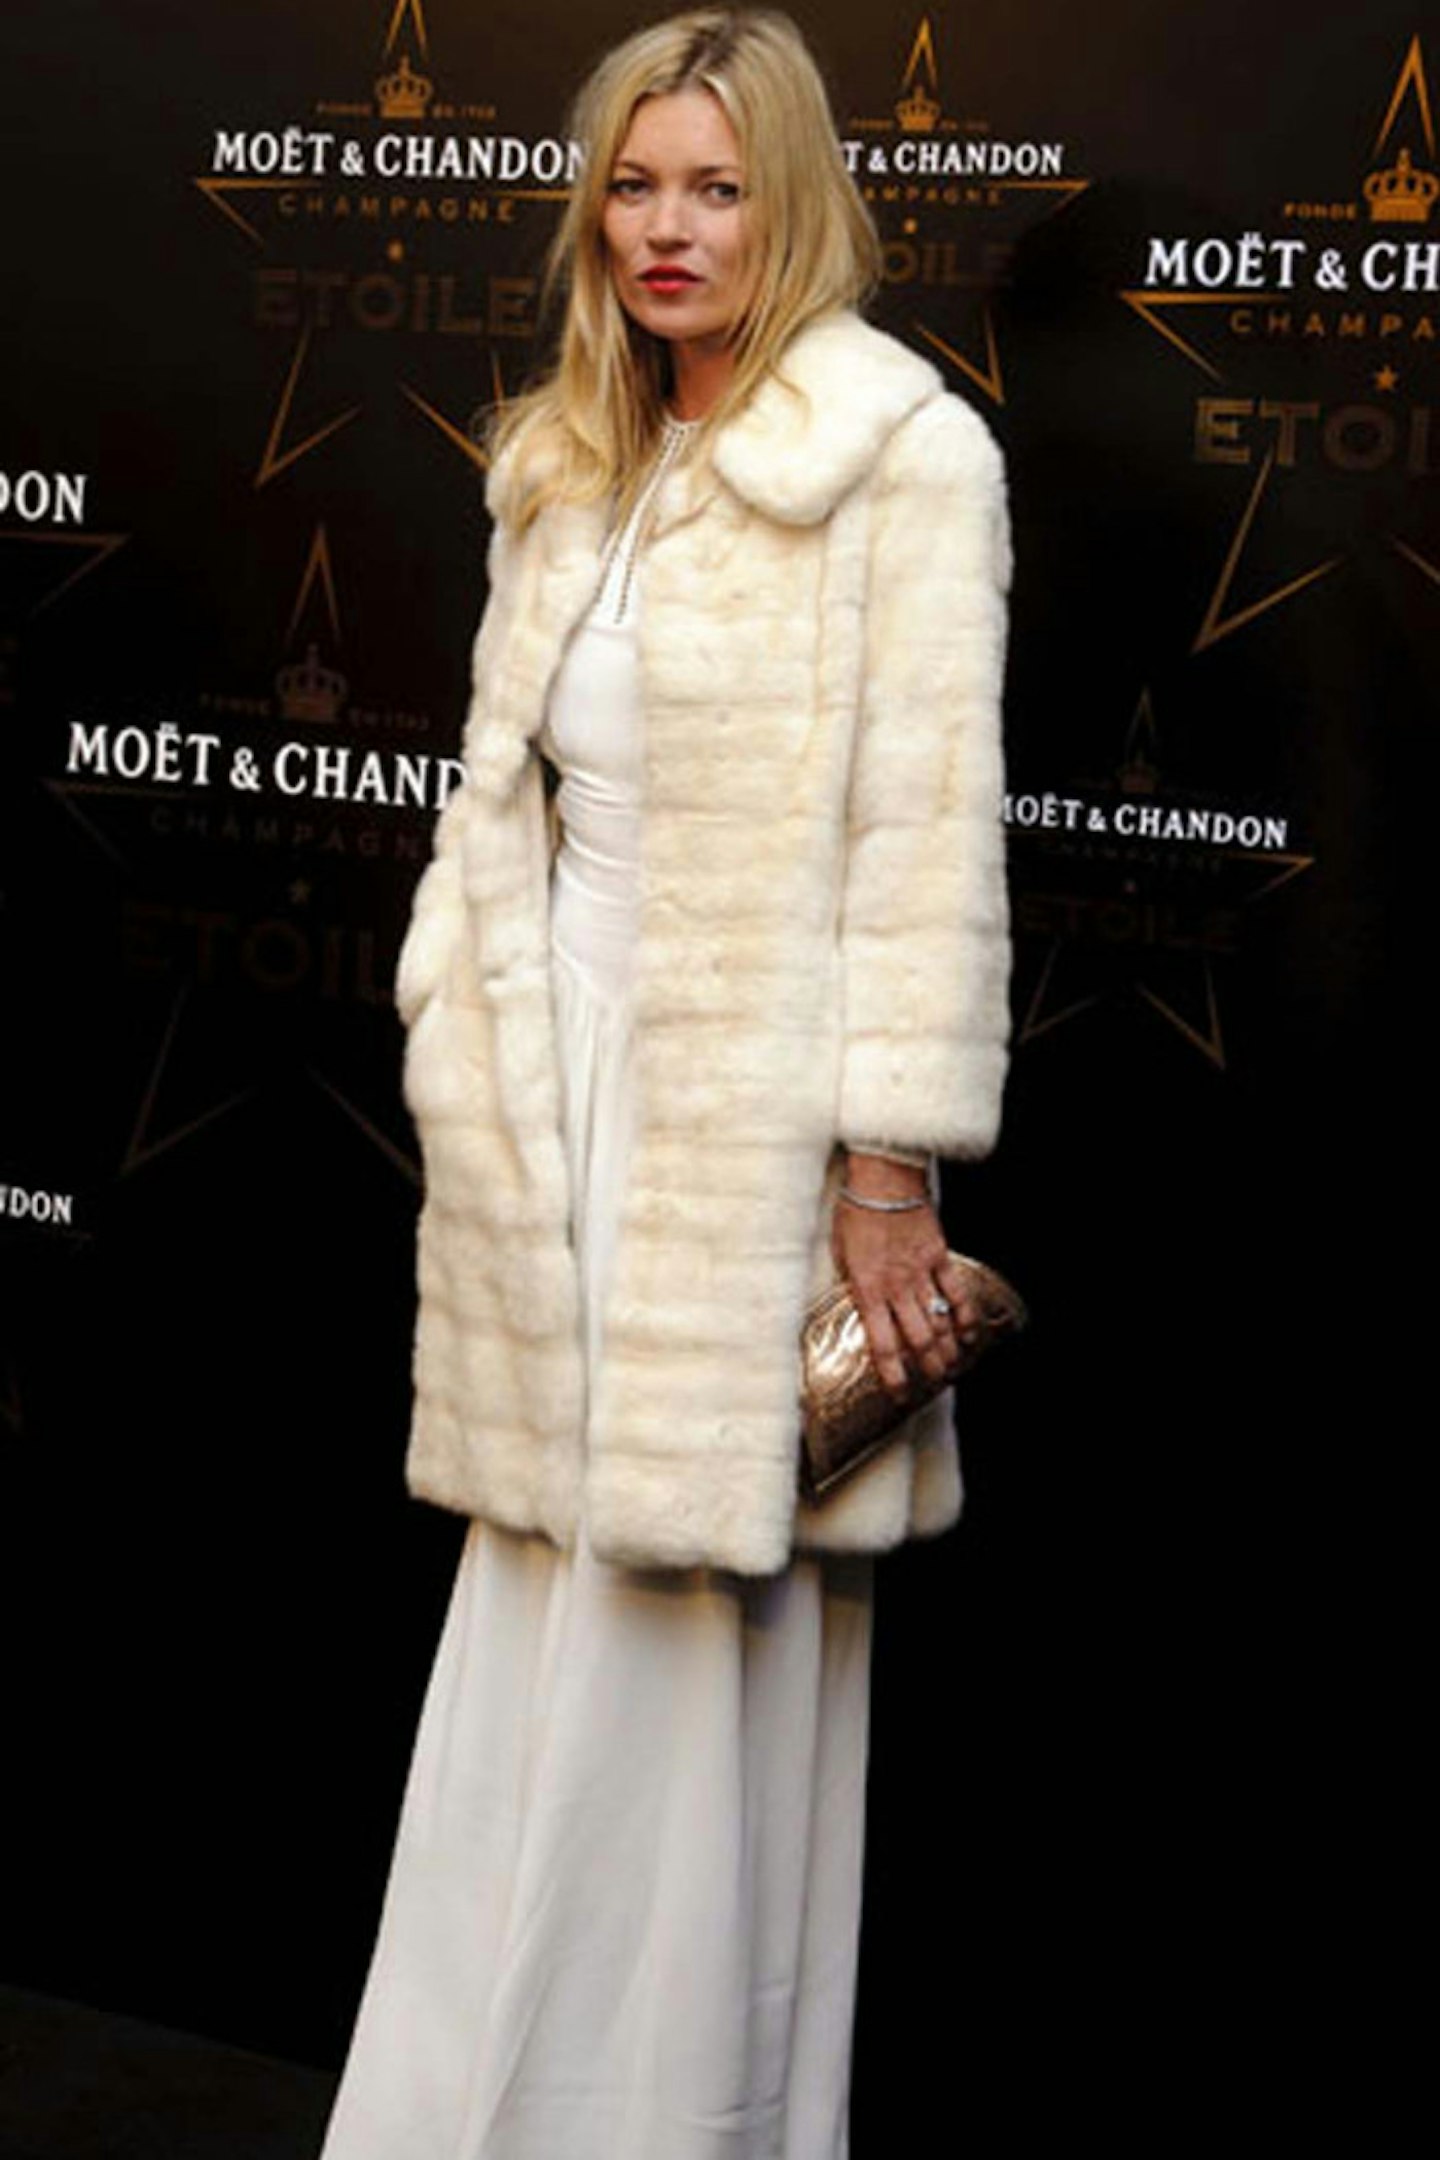 Kate Moss at the Moet and Chandon Etoile awards, September 2011